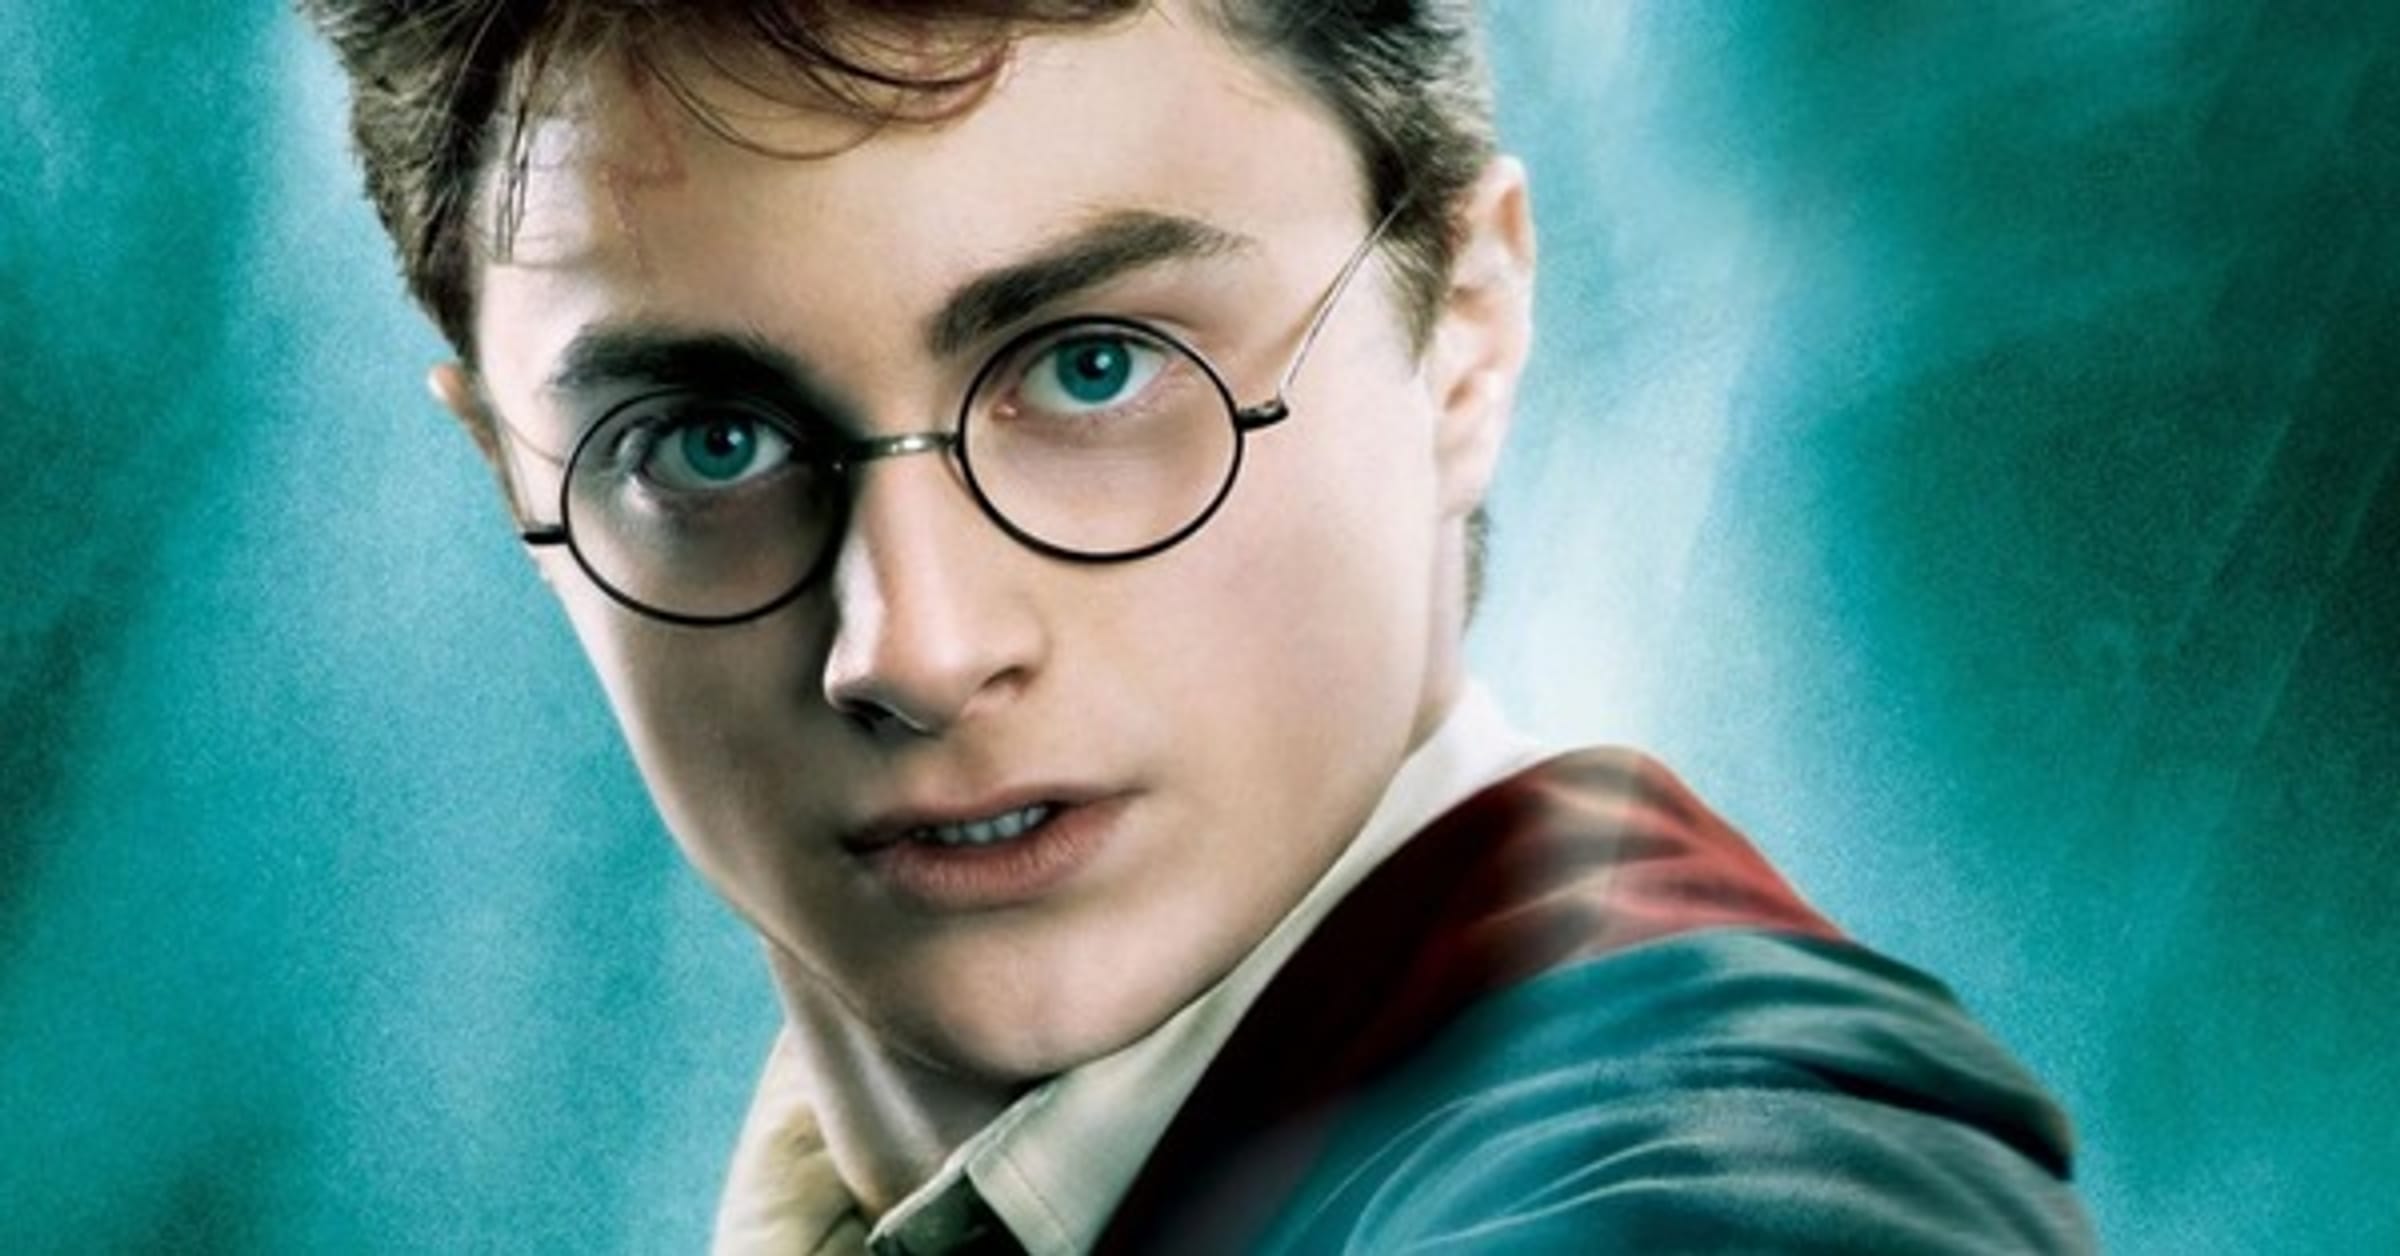 20 most famous wizards of all time from history and fiction 